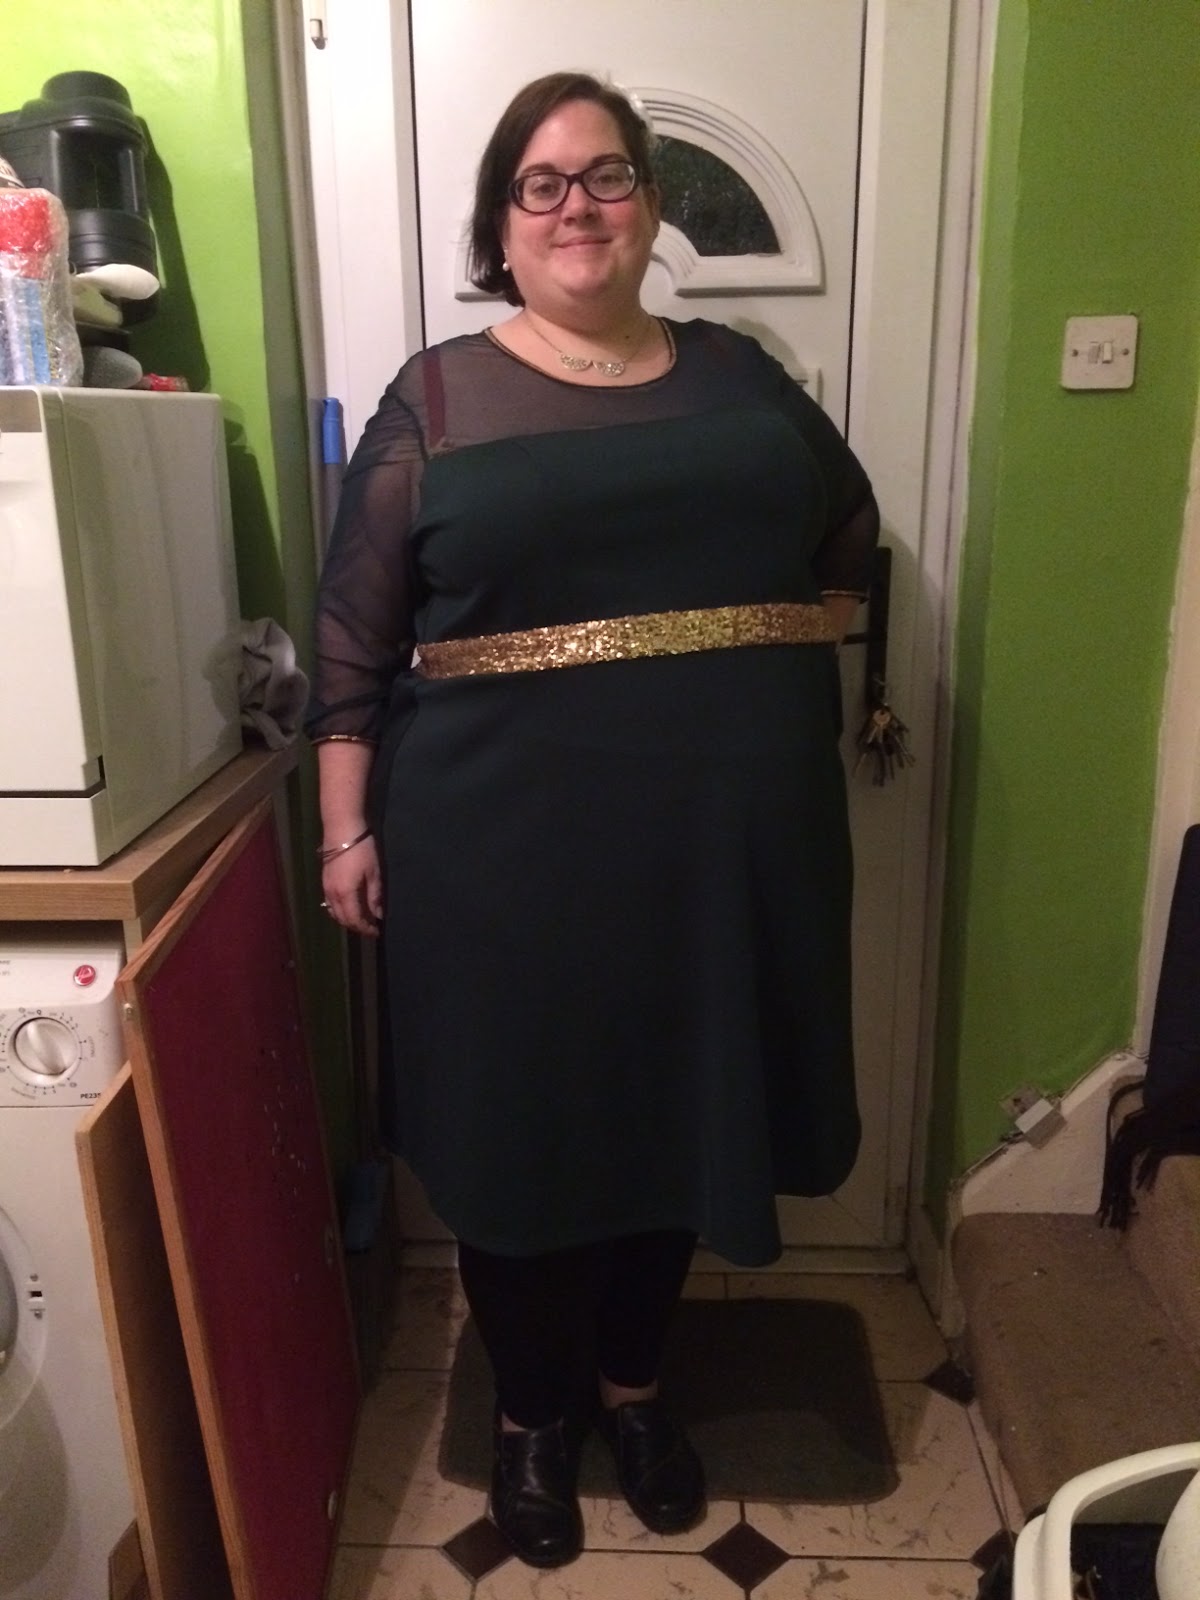 Writing, fatshion, me: What I Wore December 18th